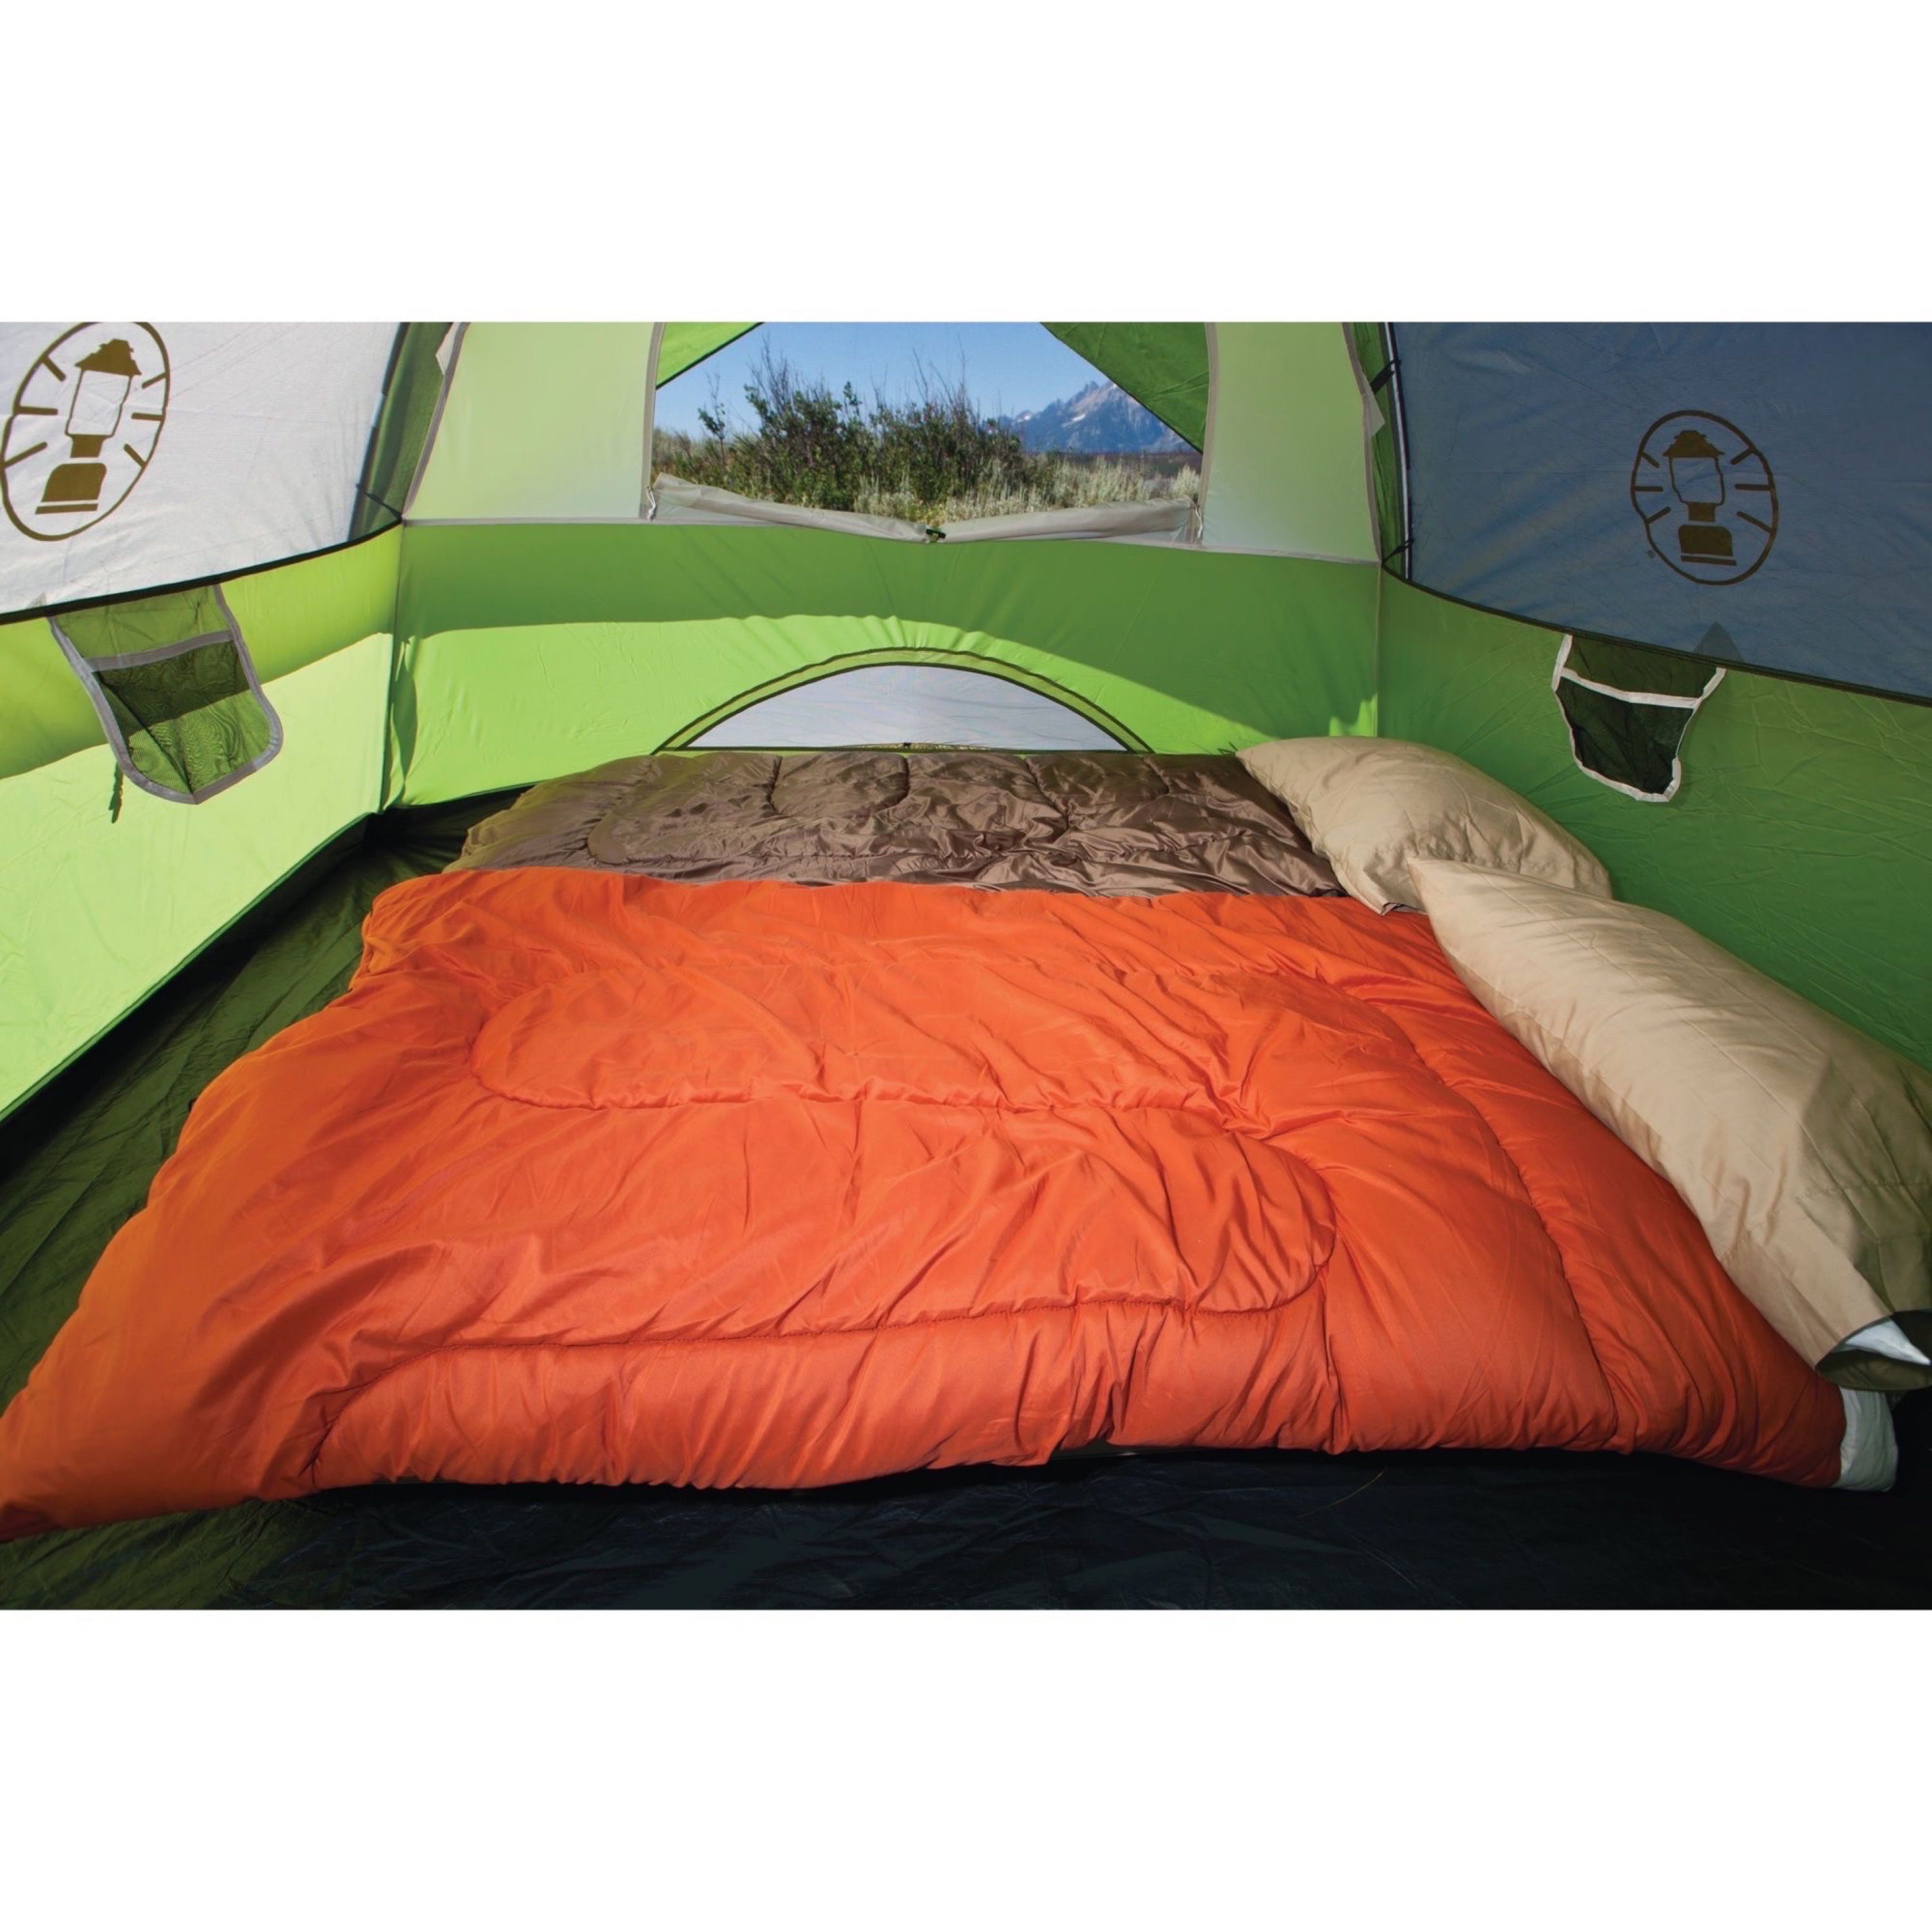 Coleman 3-Person Dome Tent - image 4 of 7